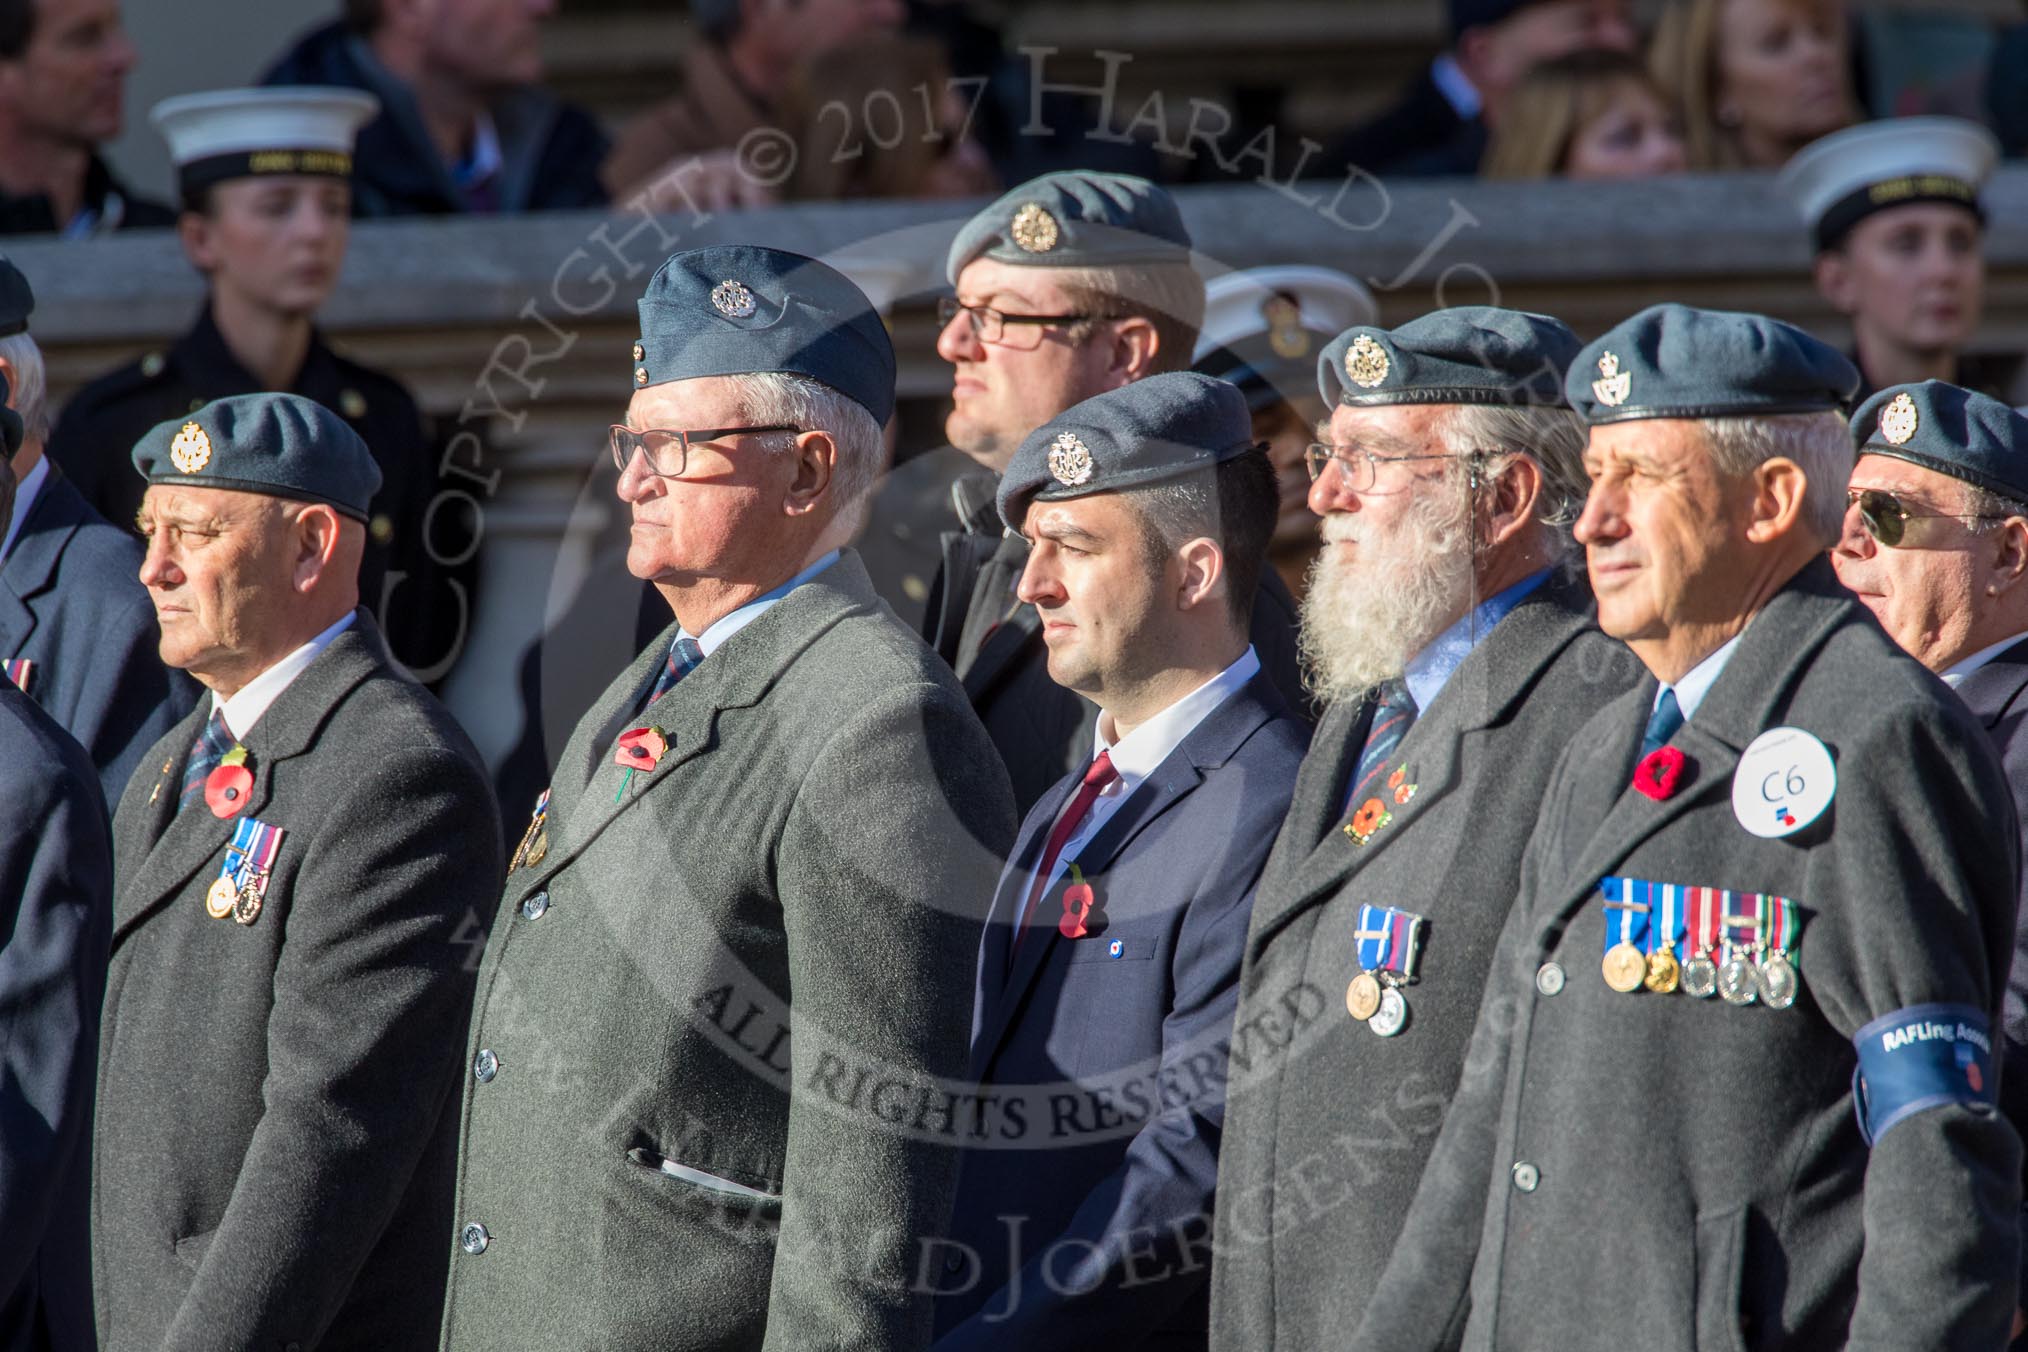 RAF Linguists' Associations (RAFLing) (Group C6, 20 members) during the Royal British Legion March Past on Remembrance Sunday at the Cenotaph, Whitehall, Westminster, London, 11 November 2018, 12:15.